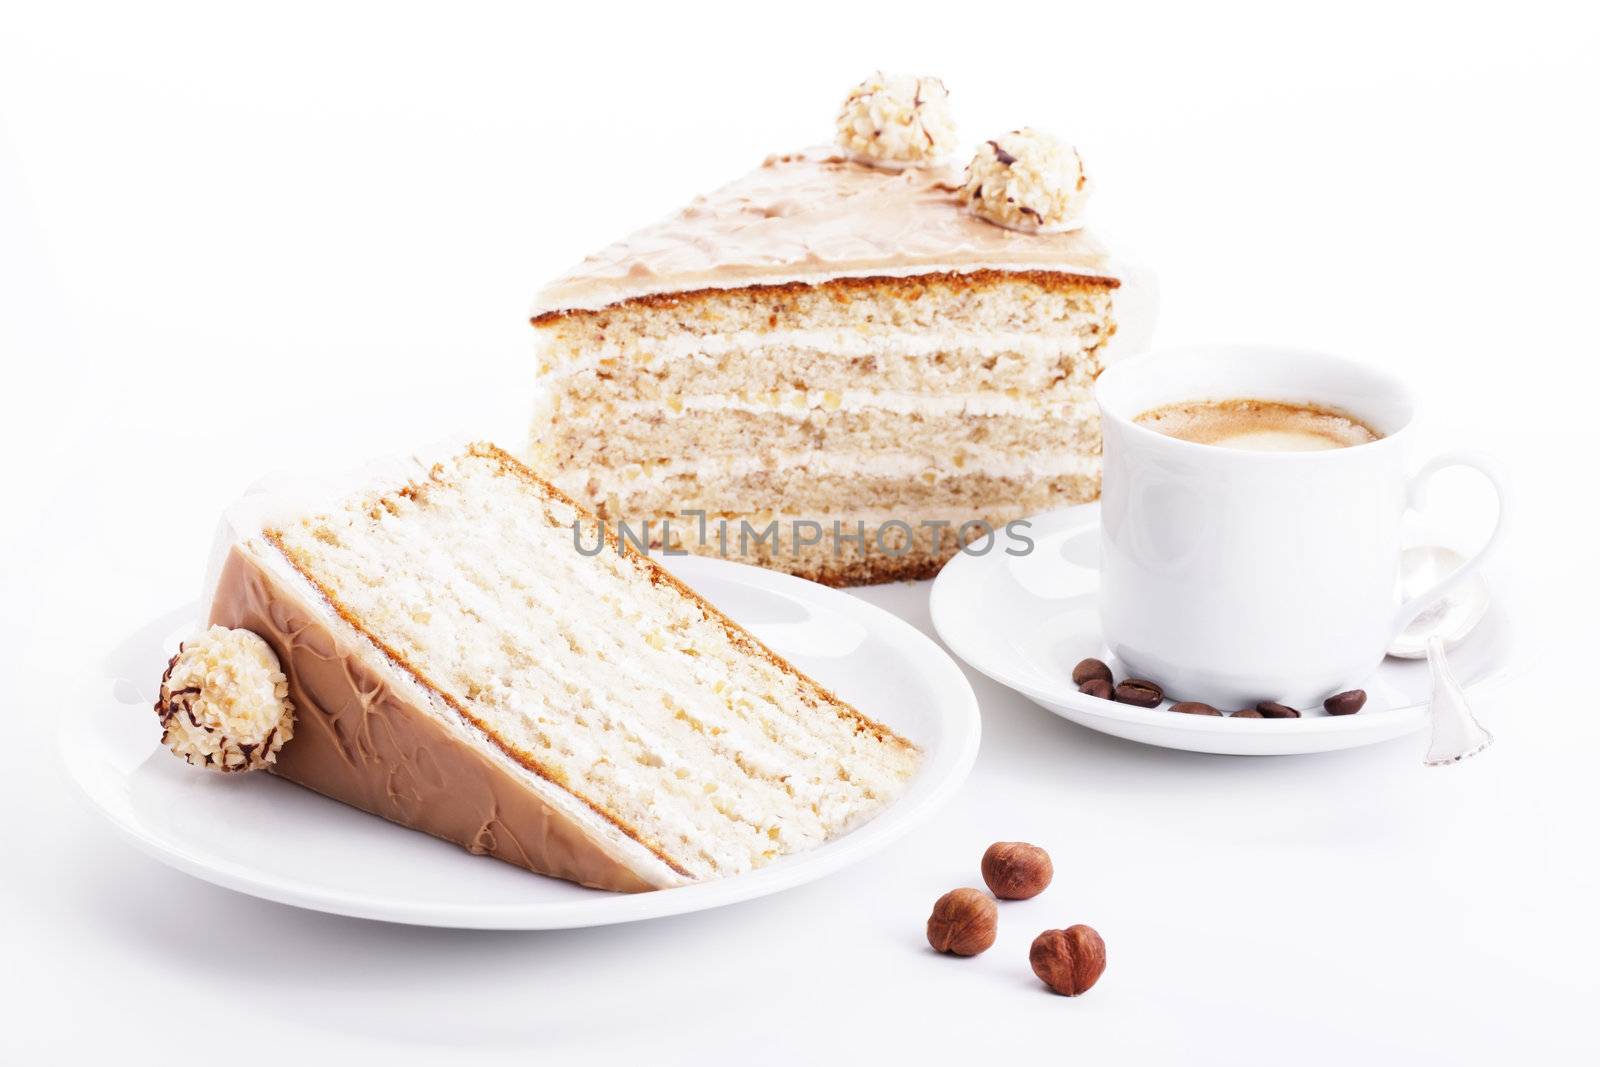 hazelnut cream cake with a cup of coffee and three hazelnuts on white background